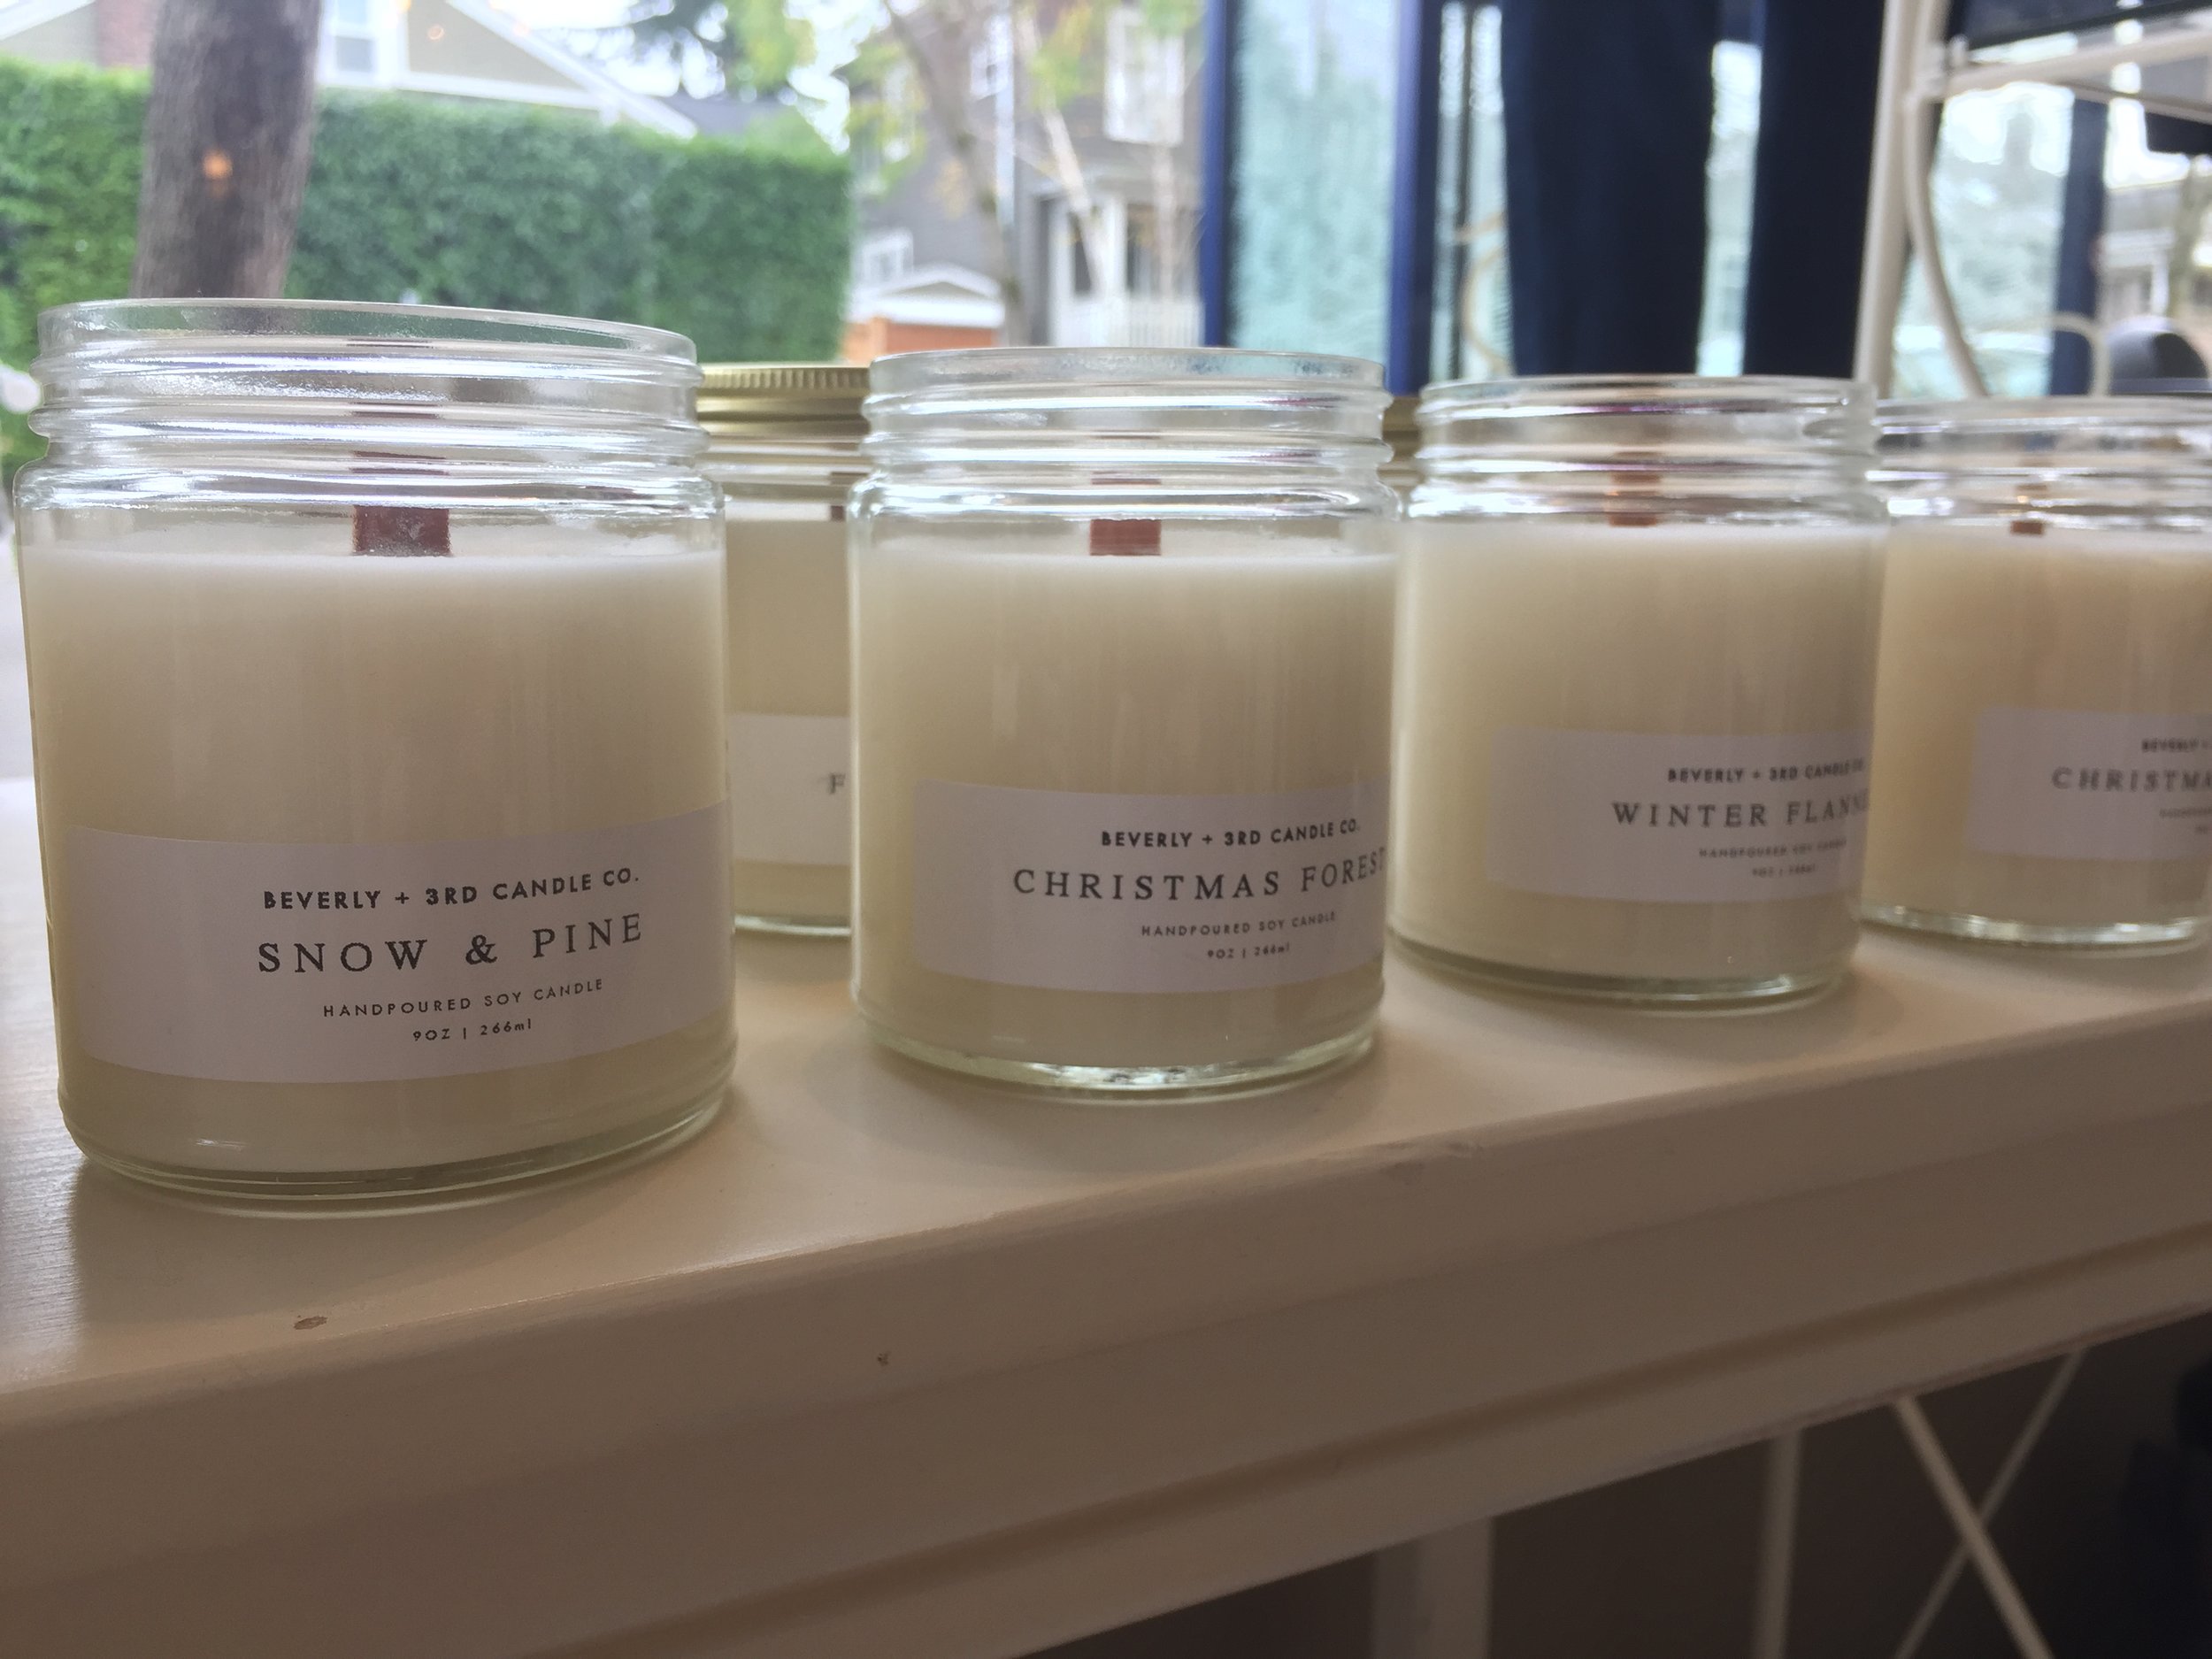 Wood Wick Soy Candles ($18)